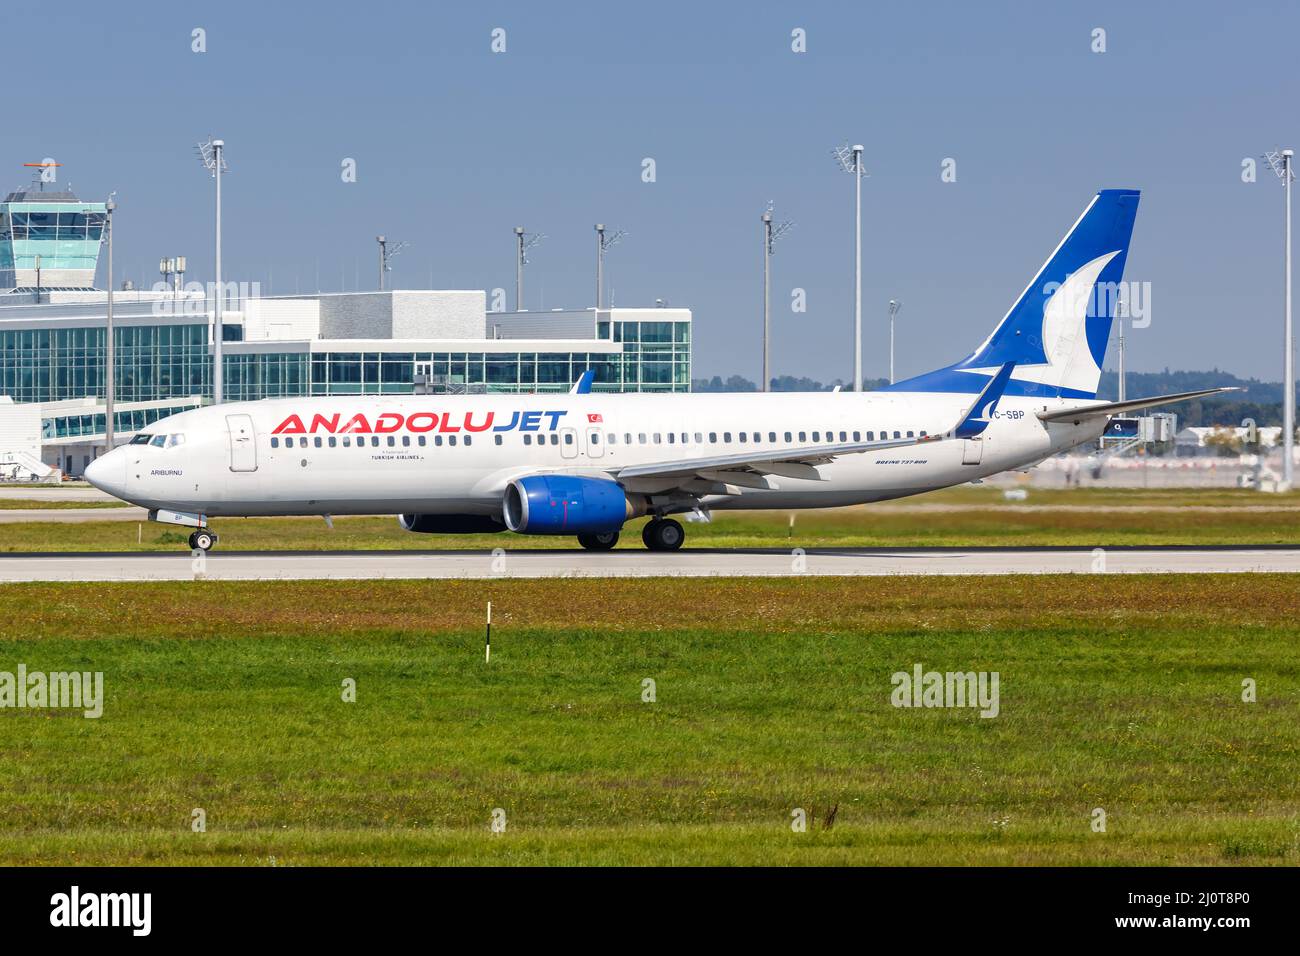 AnadoluJet Boeing 737-800 aircraft Munich Airport in Germany Stock Photo